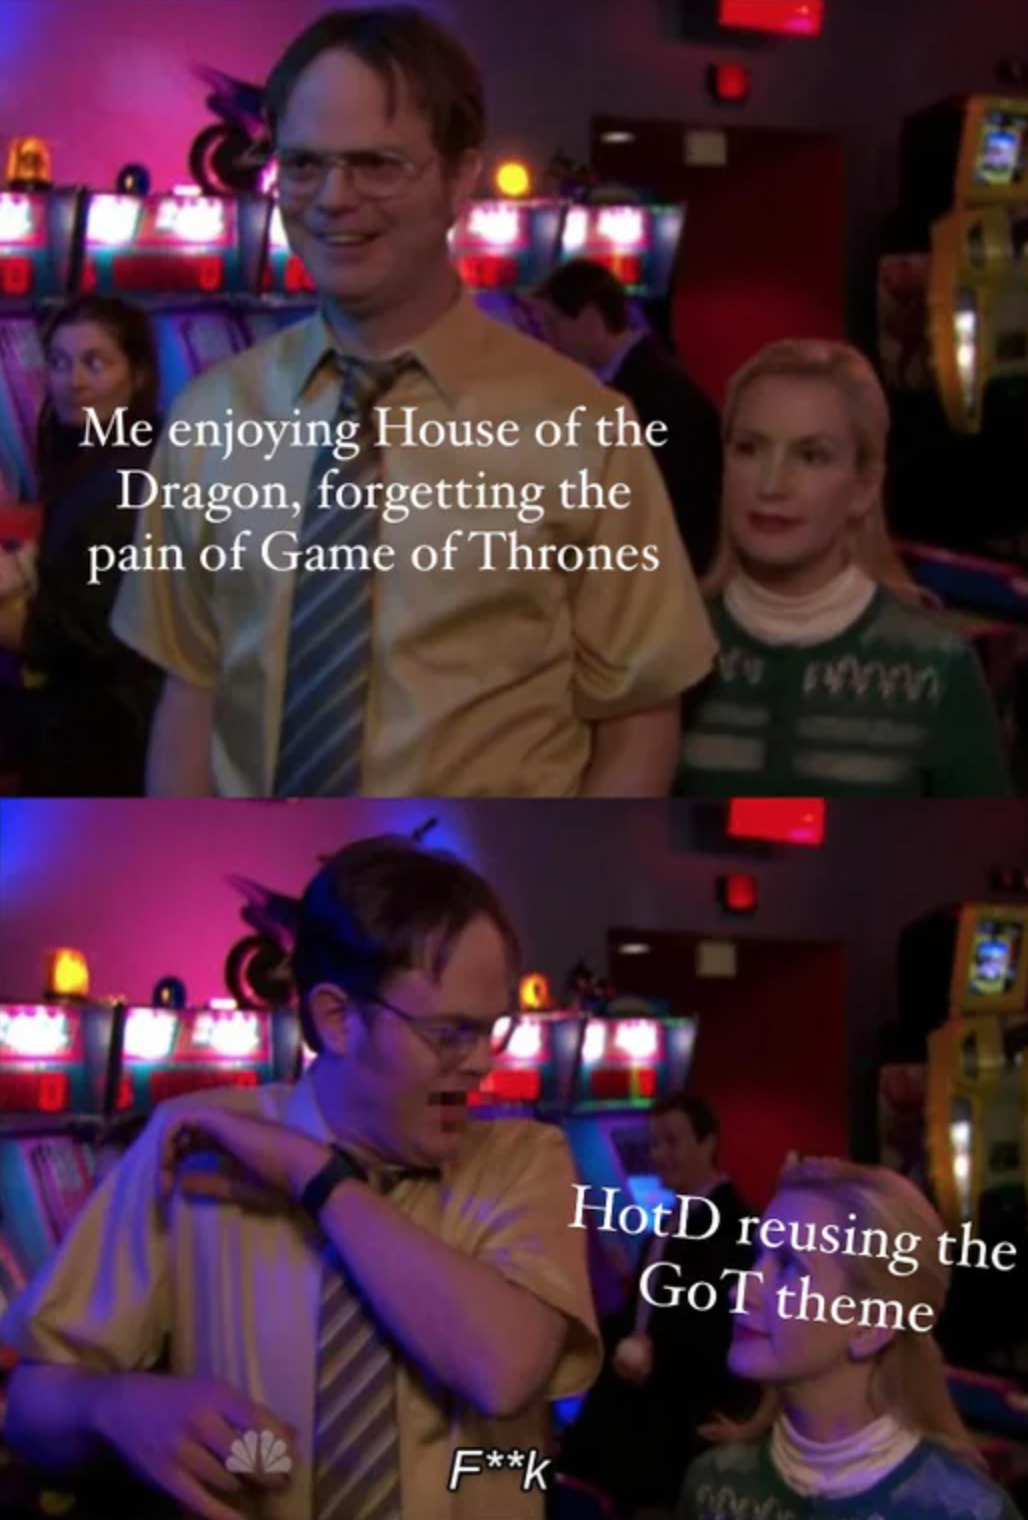 House of the Dragon Episode 2 memes - interaction - Me enjoying House of the Dragon, forgetting the pain of Game of Thrones Fk HotD reusing the GoT theme